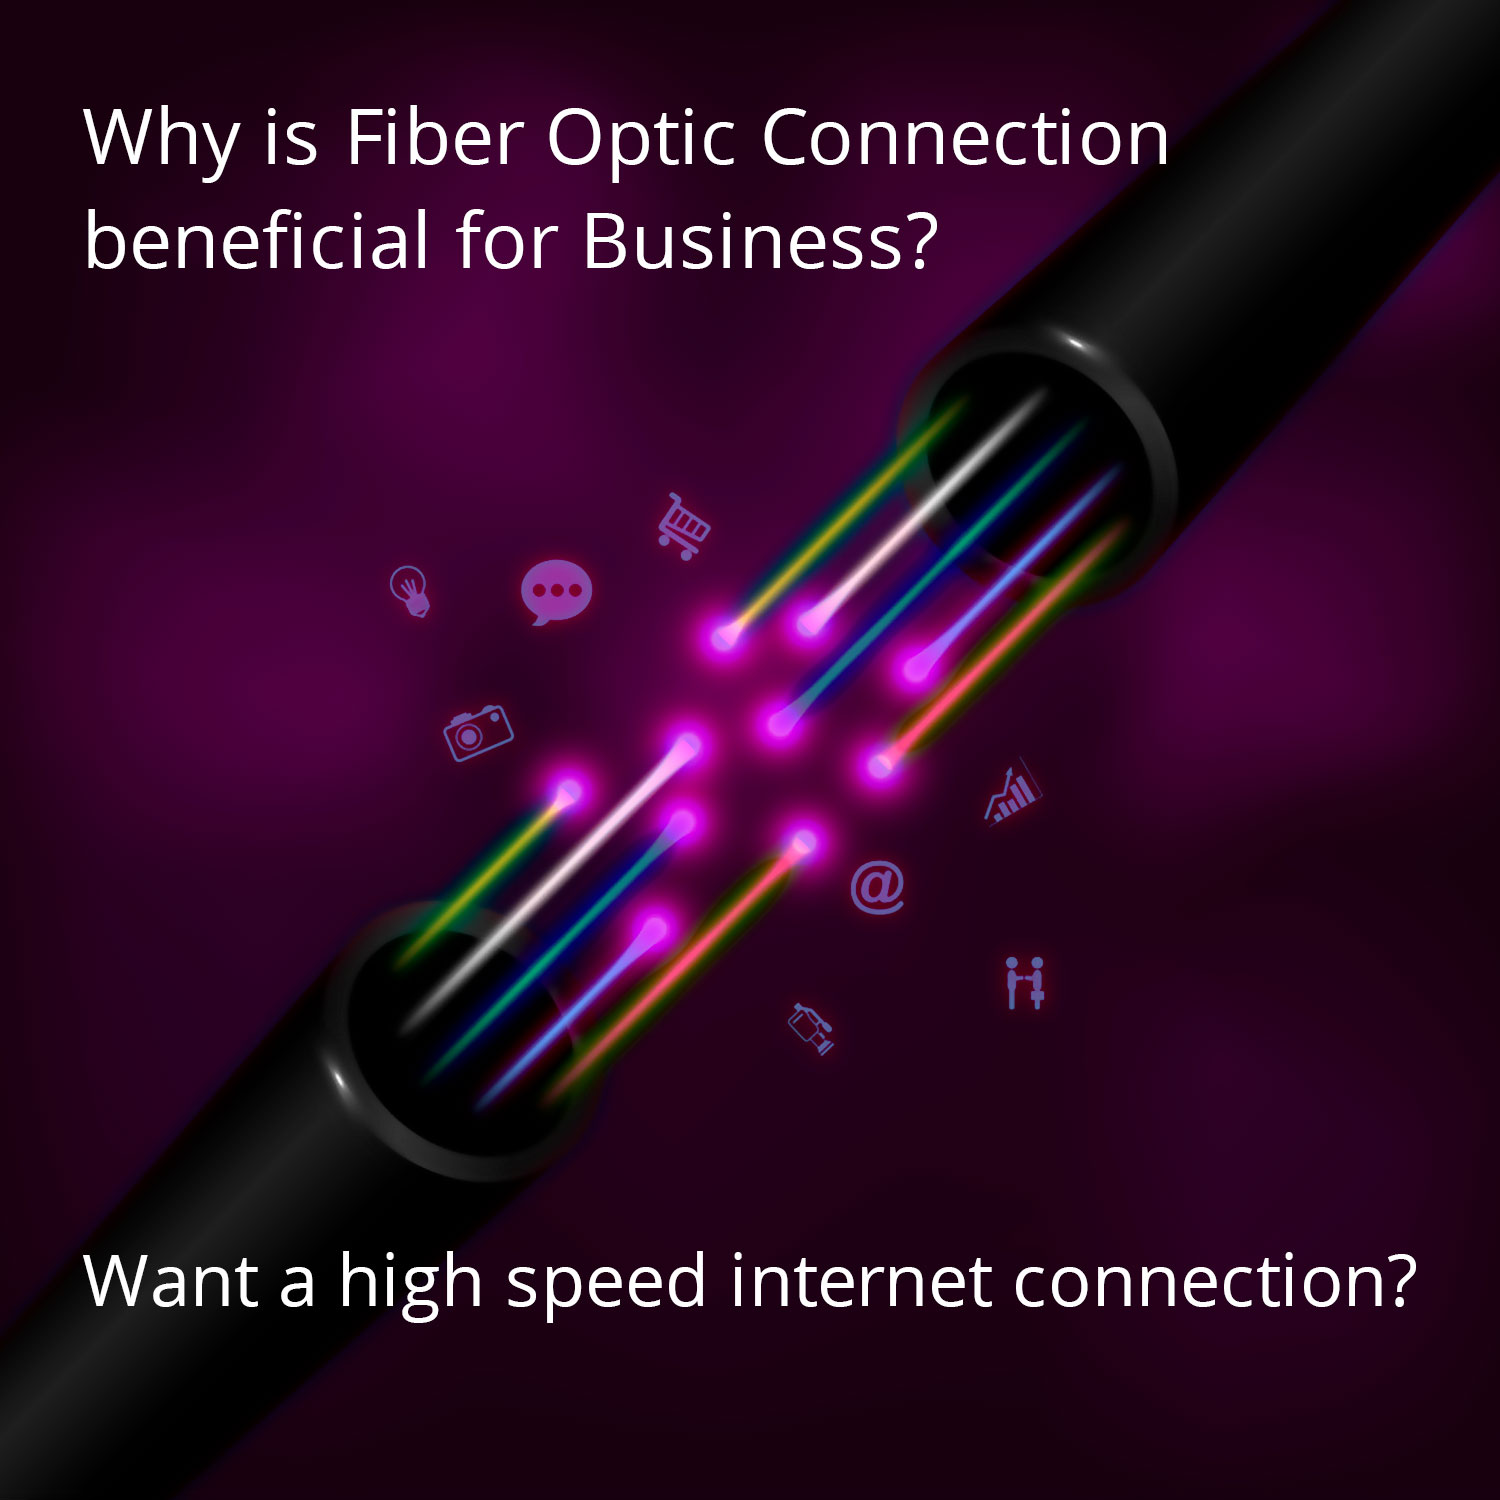 Why is Fiber Optic Connection beneficial for Business?